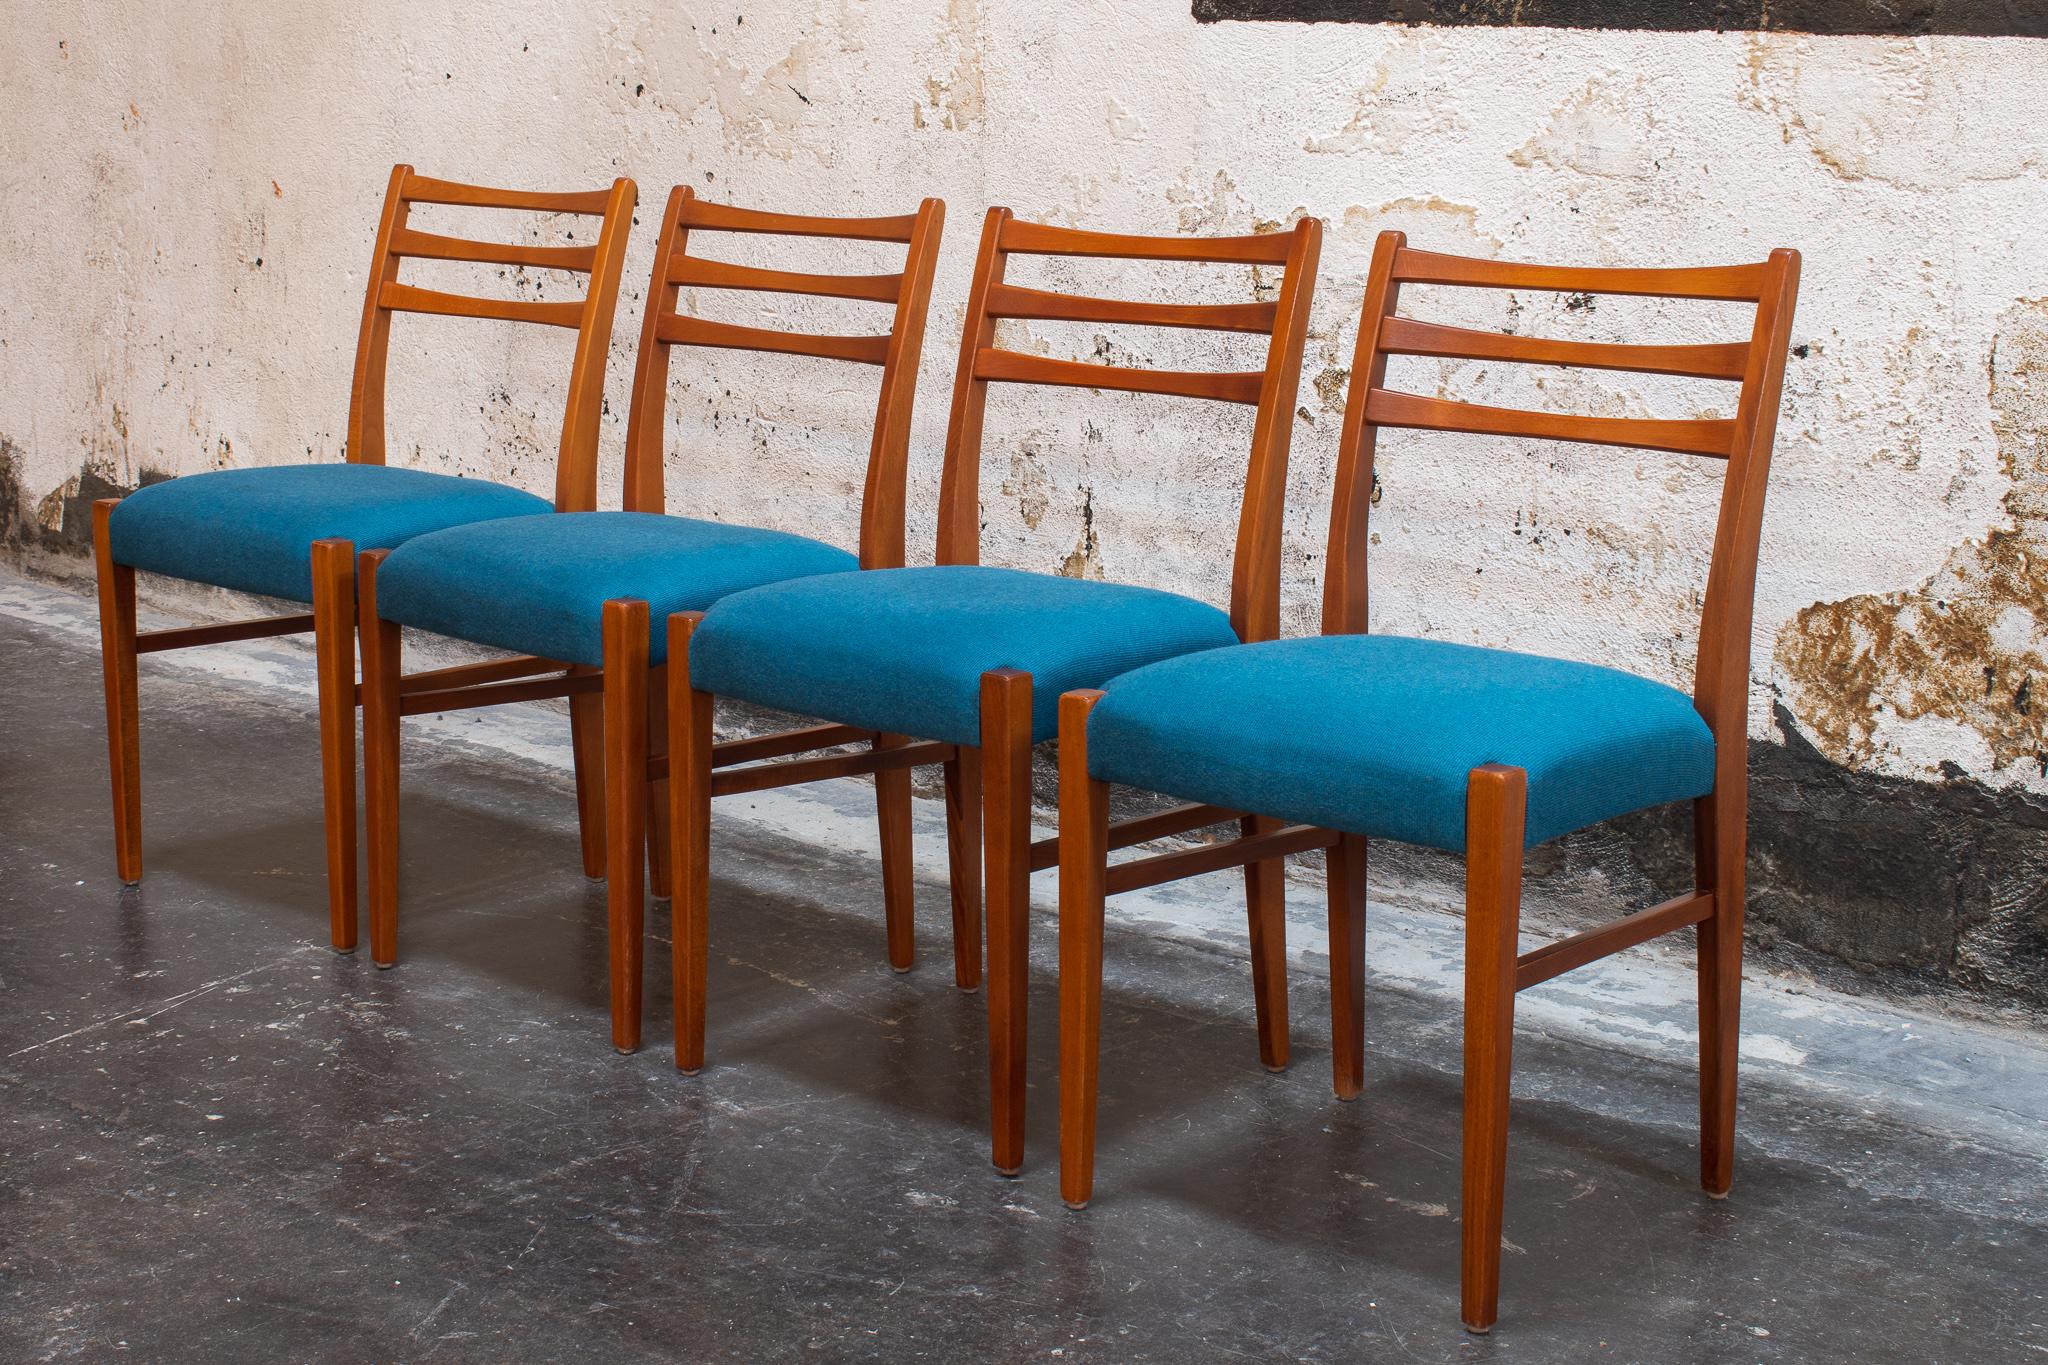 Mid-20th Century Set of Four Swedish Mid-Century Modern Teak Dining Chairs For Sale